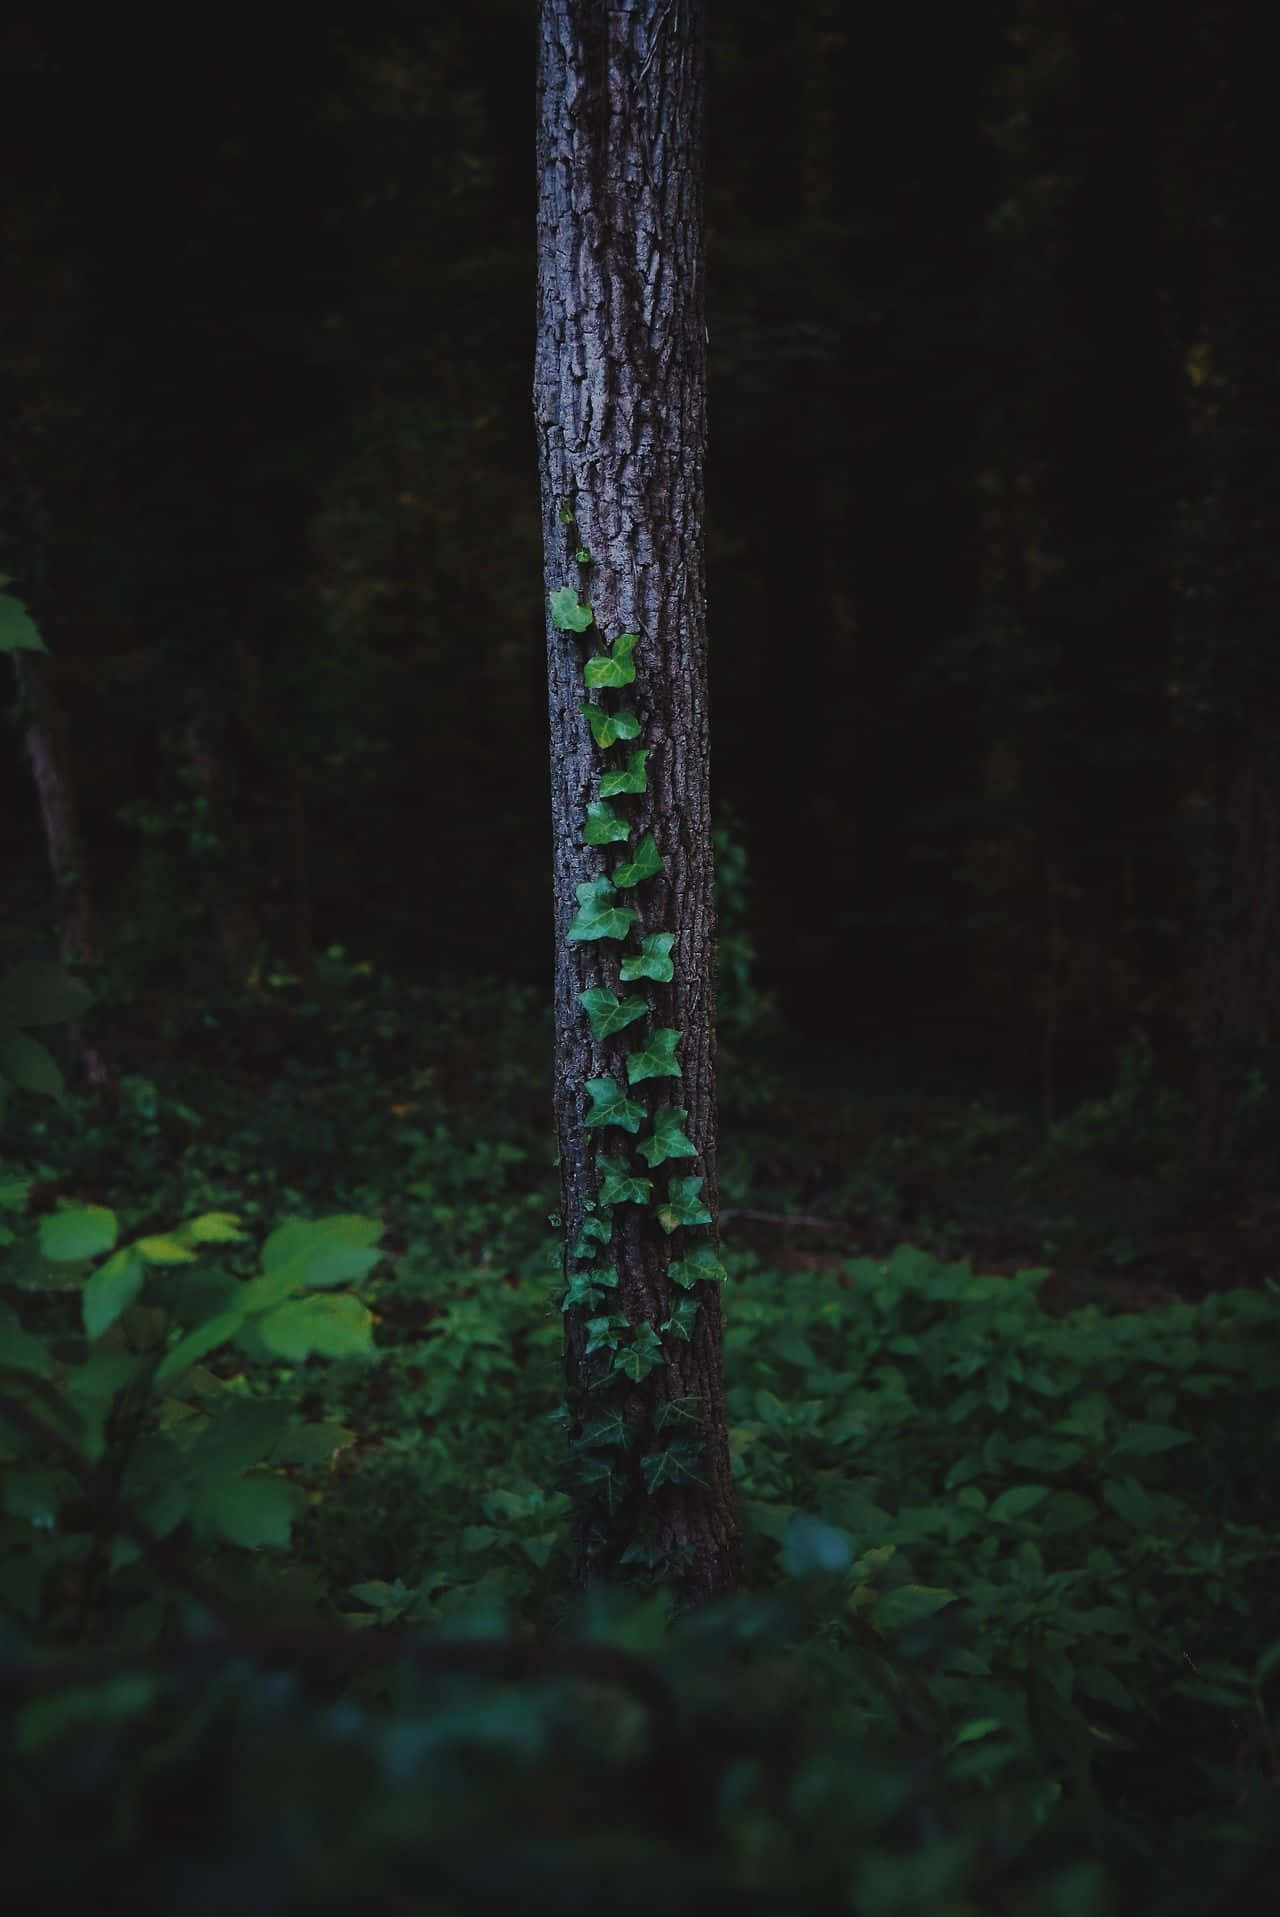 A Tree Trunk With Ivy Growing On It